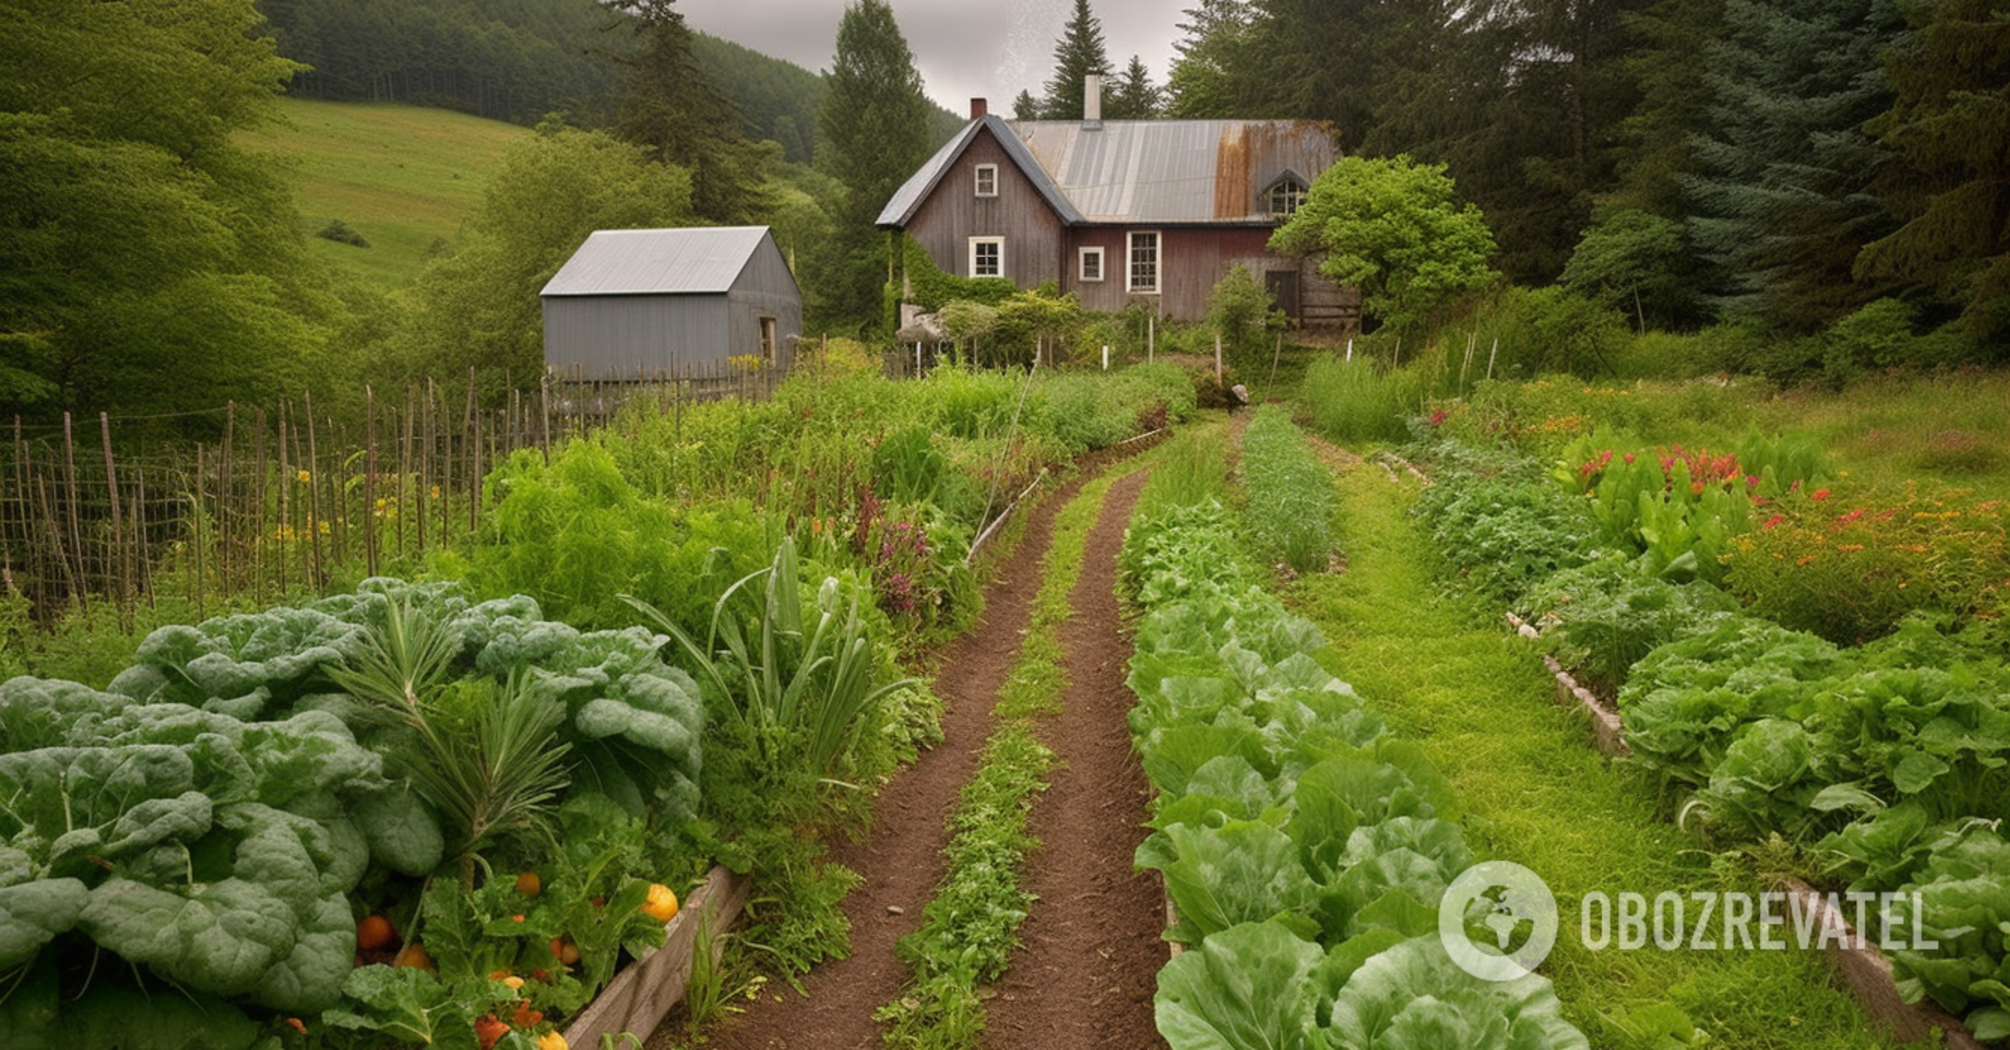 What to sow in the garden to avoid overgrowing weeds: options that will help 